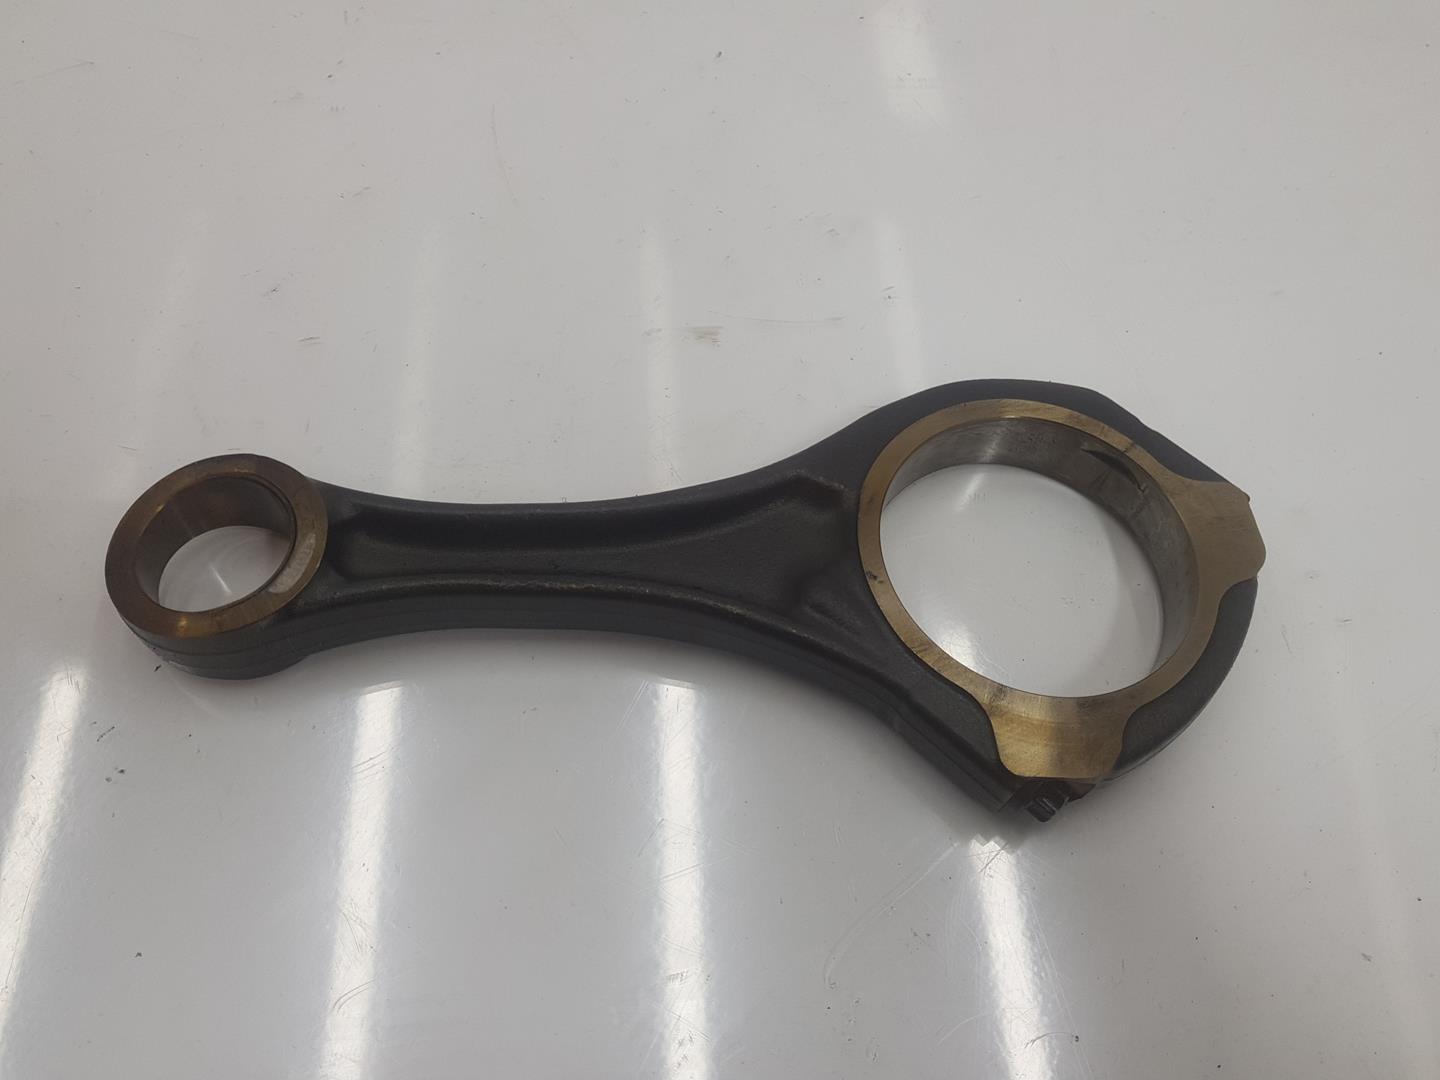 MERCEDES-BENZ GLE W166 (2015-2018) Connecting Rod A6420305220, A6420305220, 1111AA 23953641